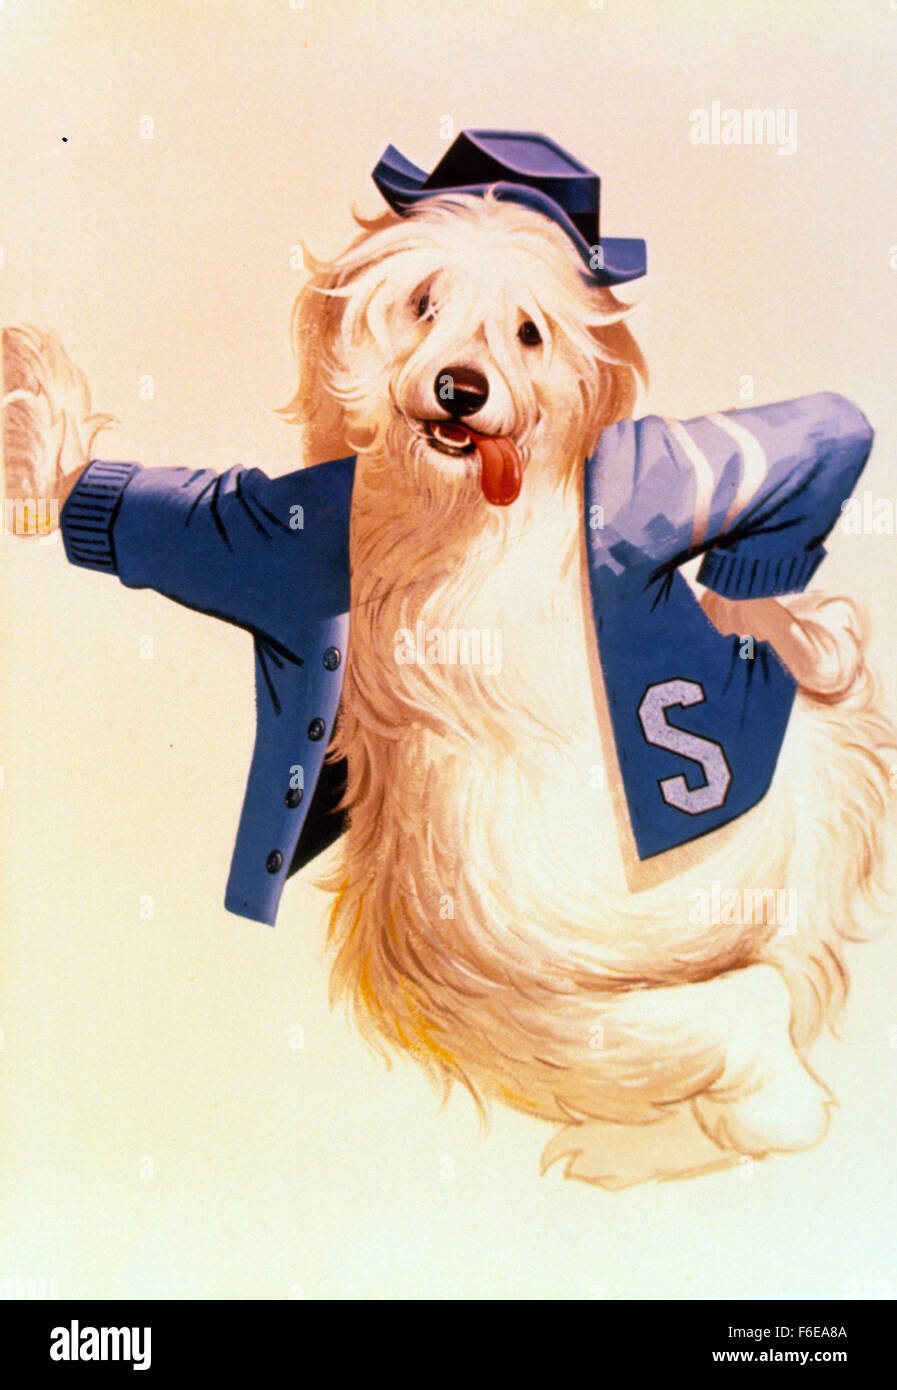 RELEASE DATE: March 19, 1959. MOVIE TITLE: The Shaggy Dog. STUDIO: Walt Disney Productions. PLOT: Through an ancient spell, a boy changes into a sheepdog and back again. It seems to happen at inopportune times and the spell can only be broken by an act of bravery. PICTURED: . Stock Photo